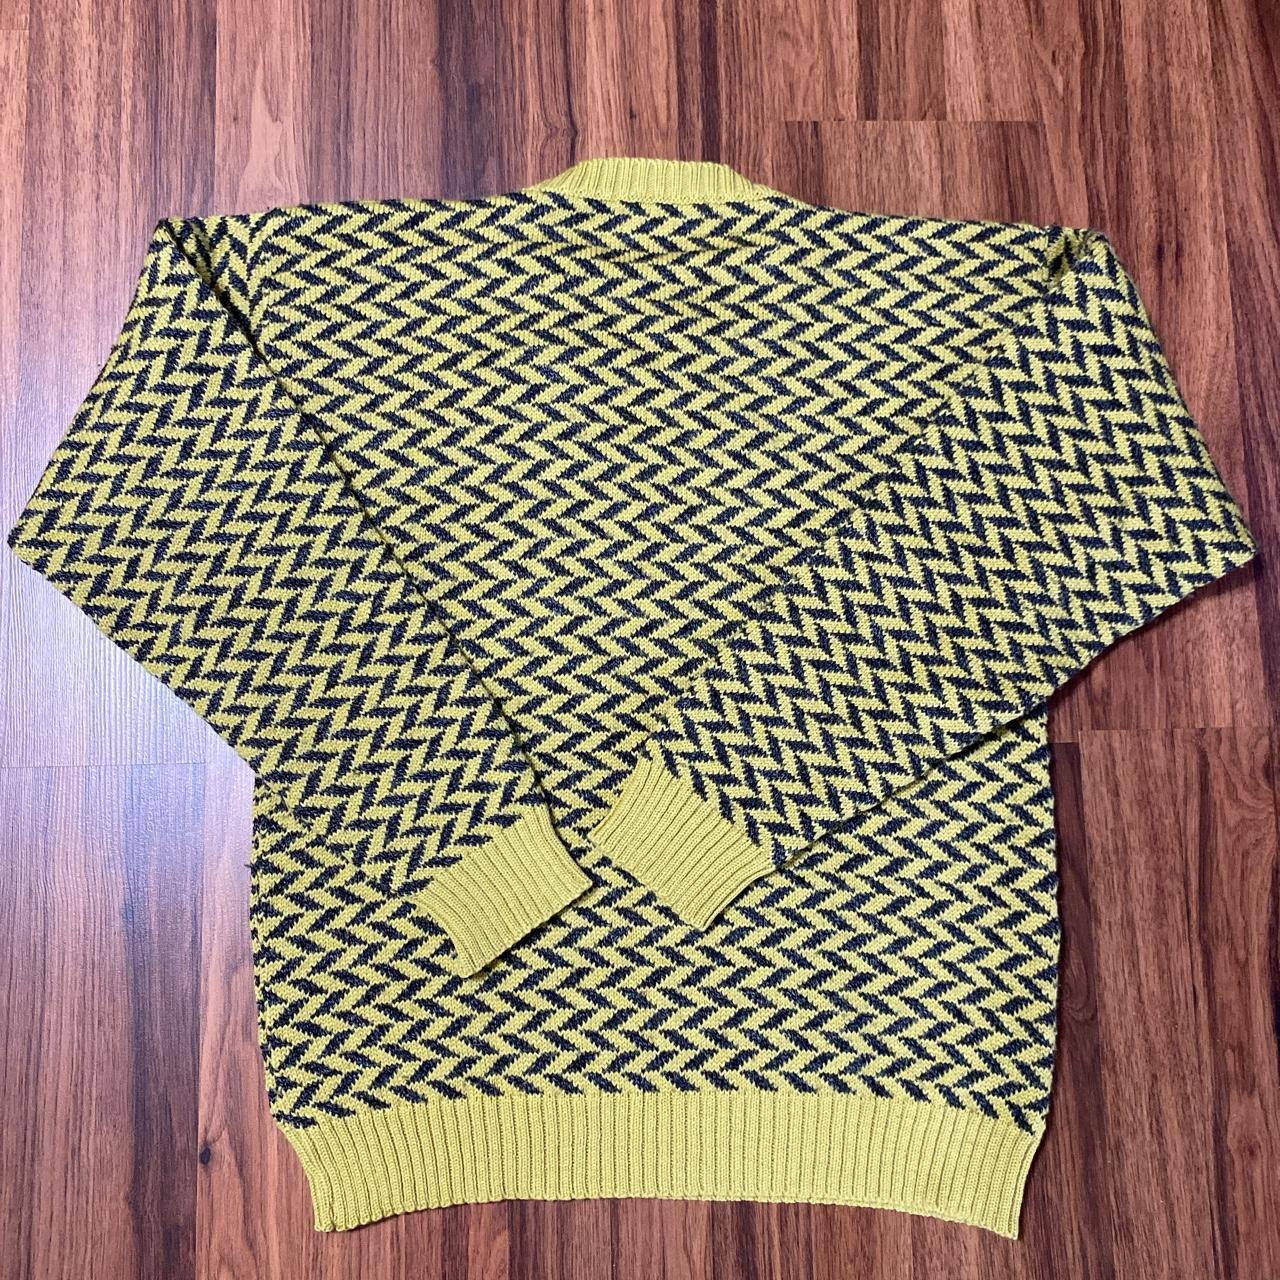 Barney's Men's Yellow and Grey Jumper (2)